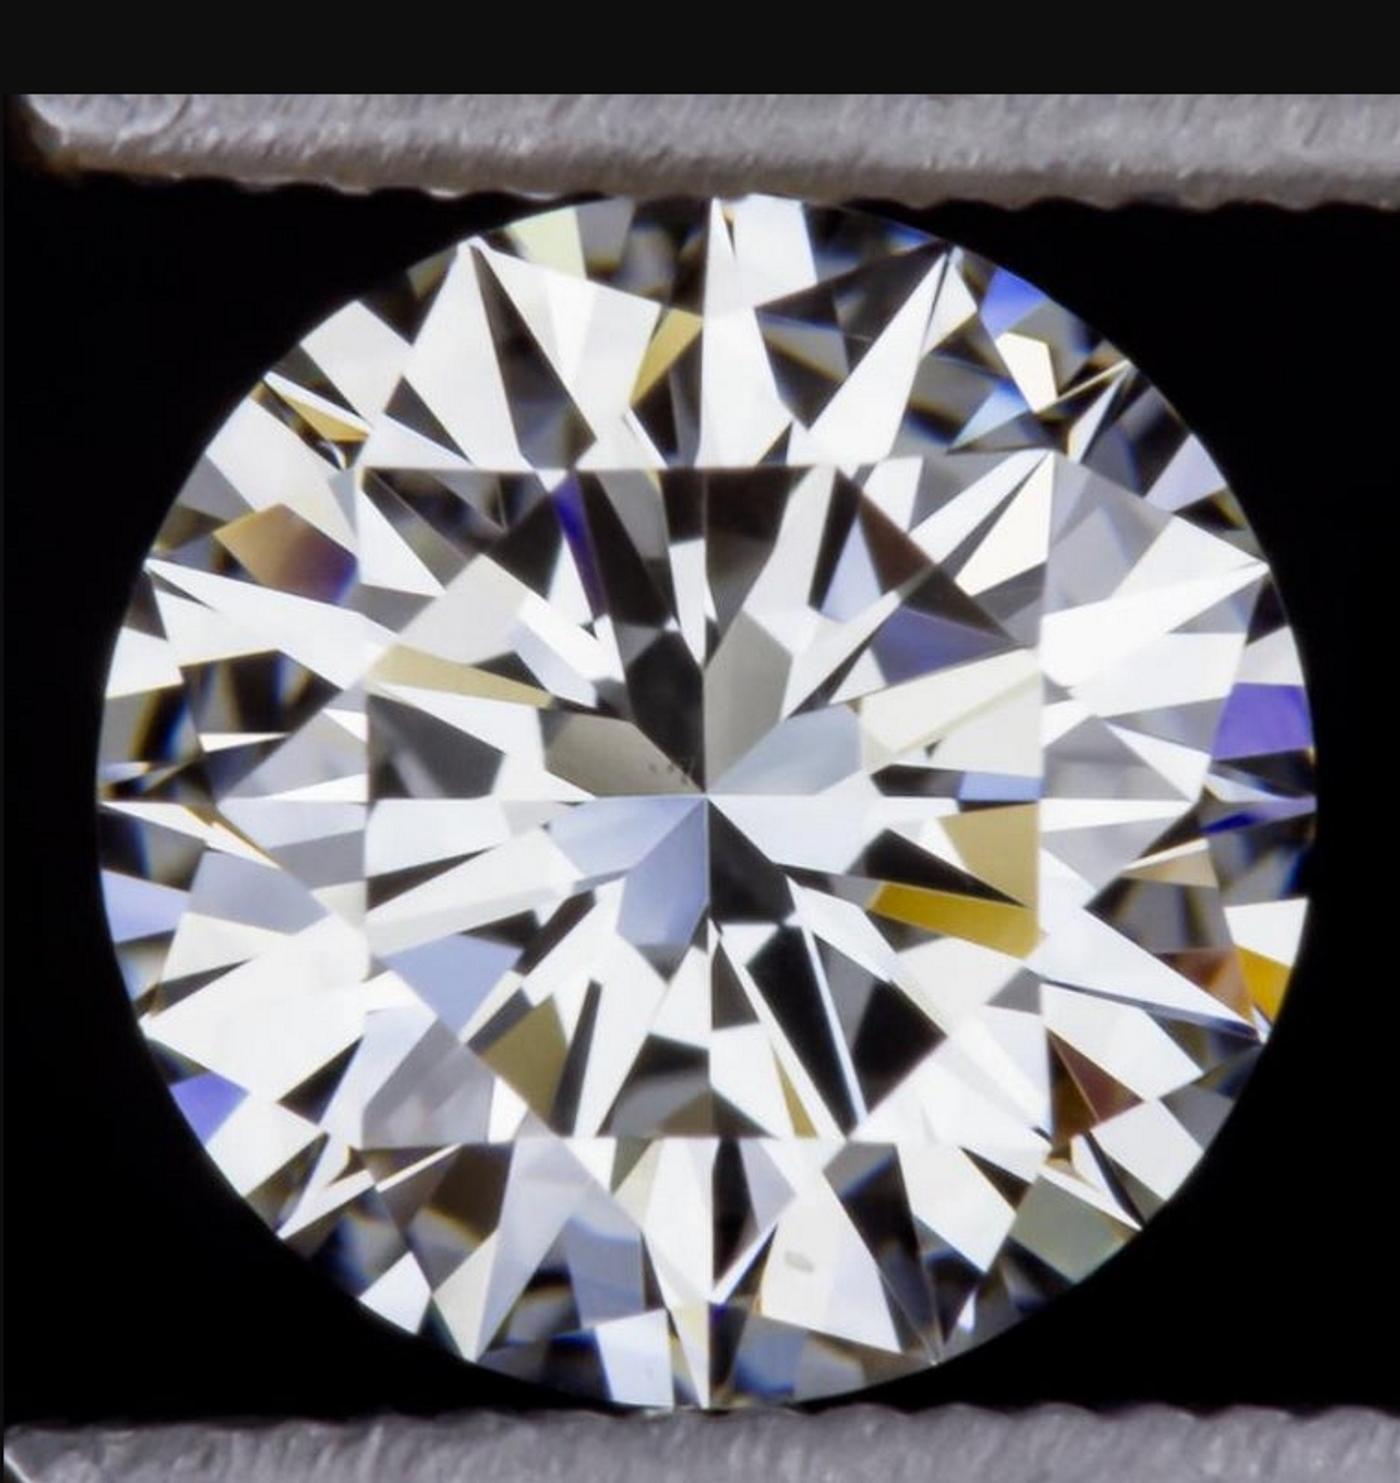 This GIA certified triple excellent diamond is very high quality with excellent VS2 clarity, beautiful white color, and absolutely phenomenal sparkle! 

This large round brilliant cut diamond is certified by GIA, the world’s premier gemological